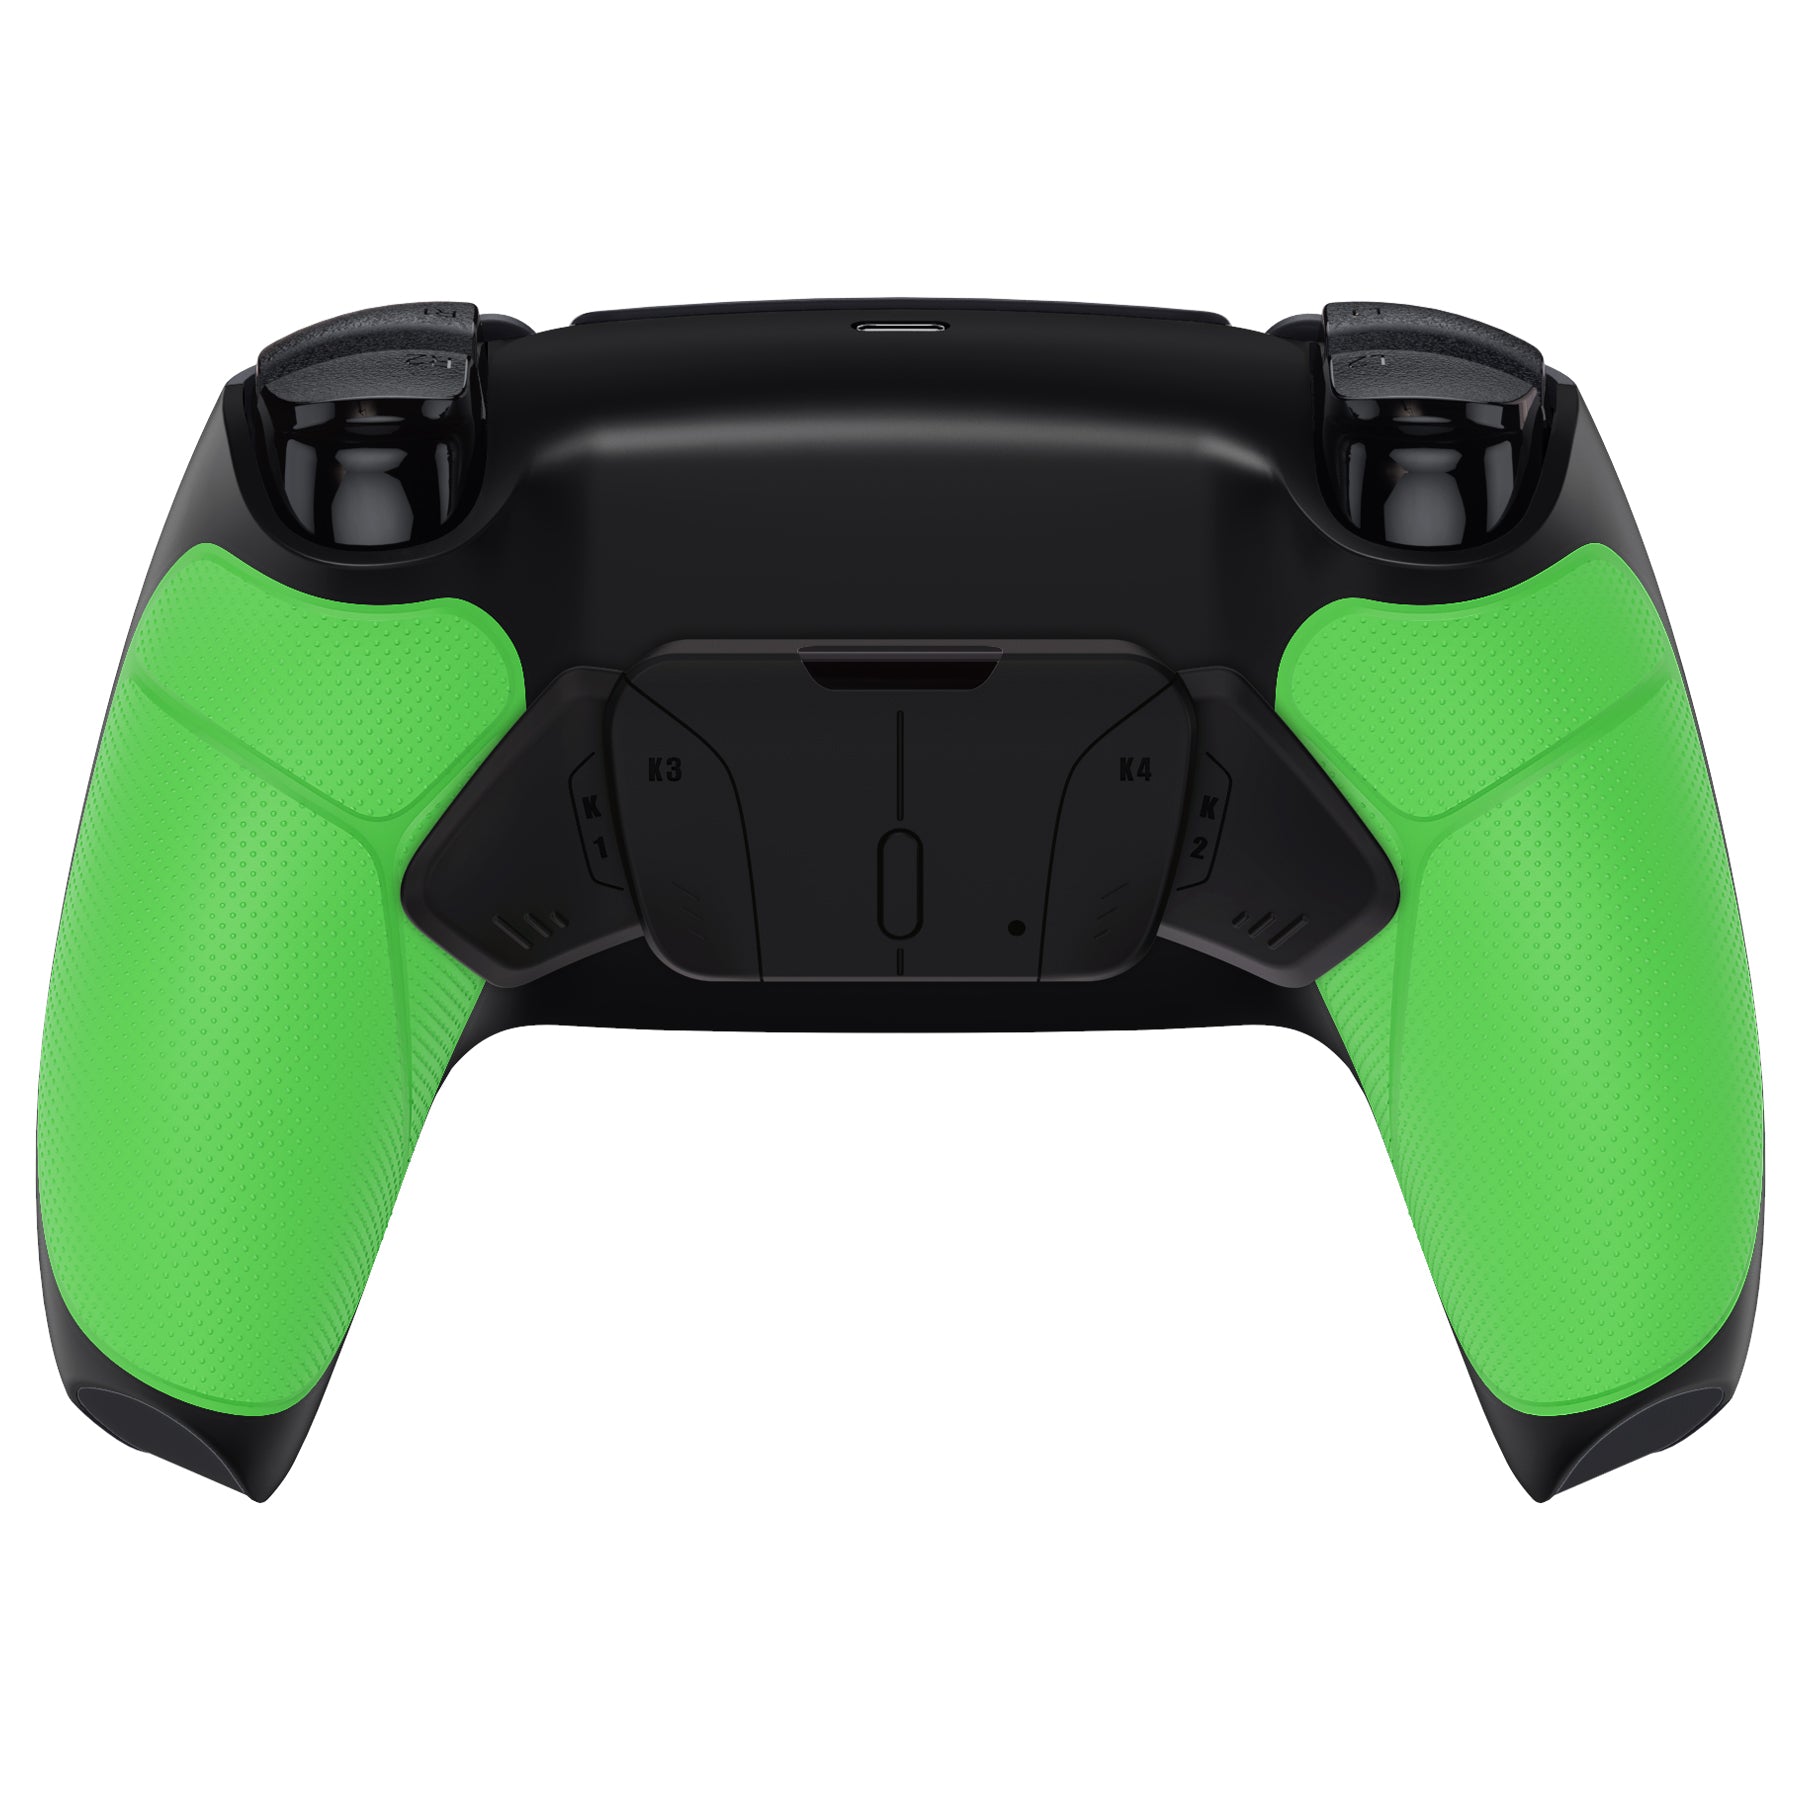 eXtremeRate Retail eXtremeRate Rubberized Green Grip Remappable RISE 4.0 Remap Kit for ps5 Controller BDM-030, Upgrade Board & Redesigned Black Back Shell & 4 Back Buttons for ps5 Controller - Controller NOT Included - YPFU6004G3